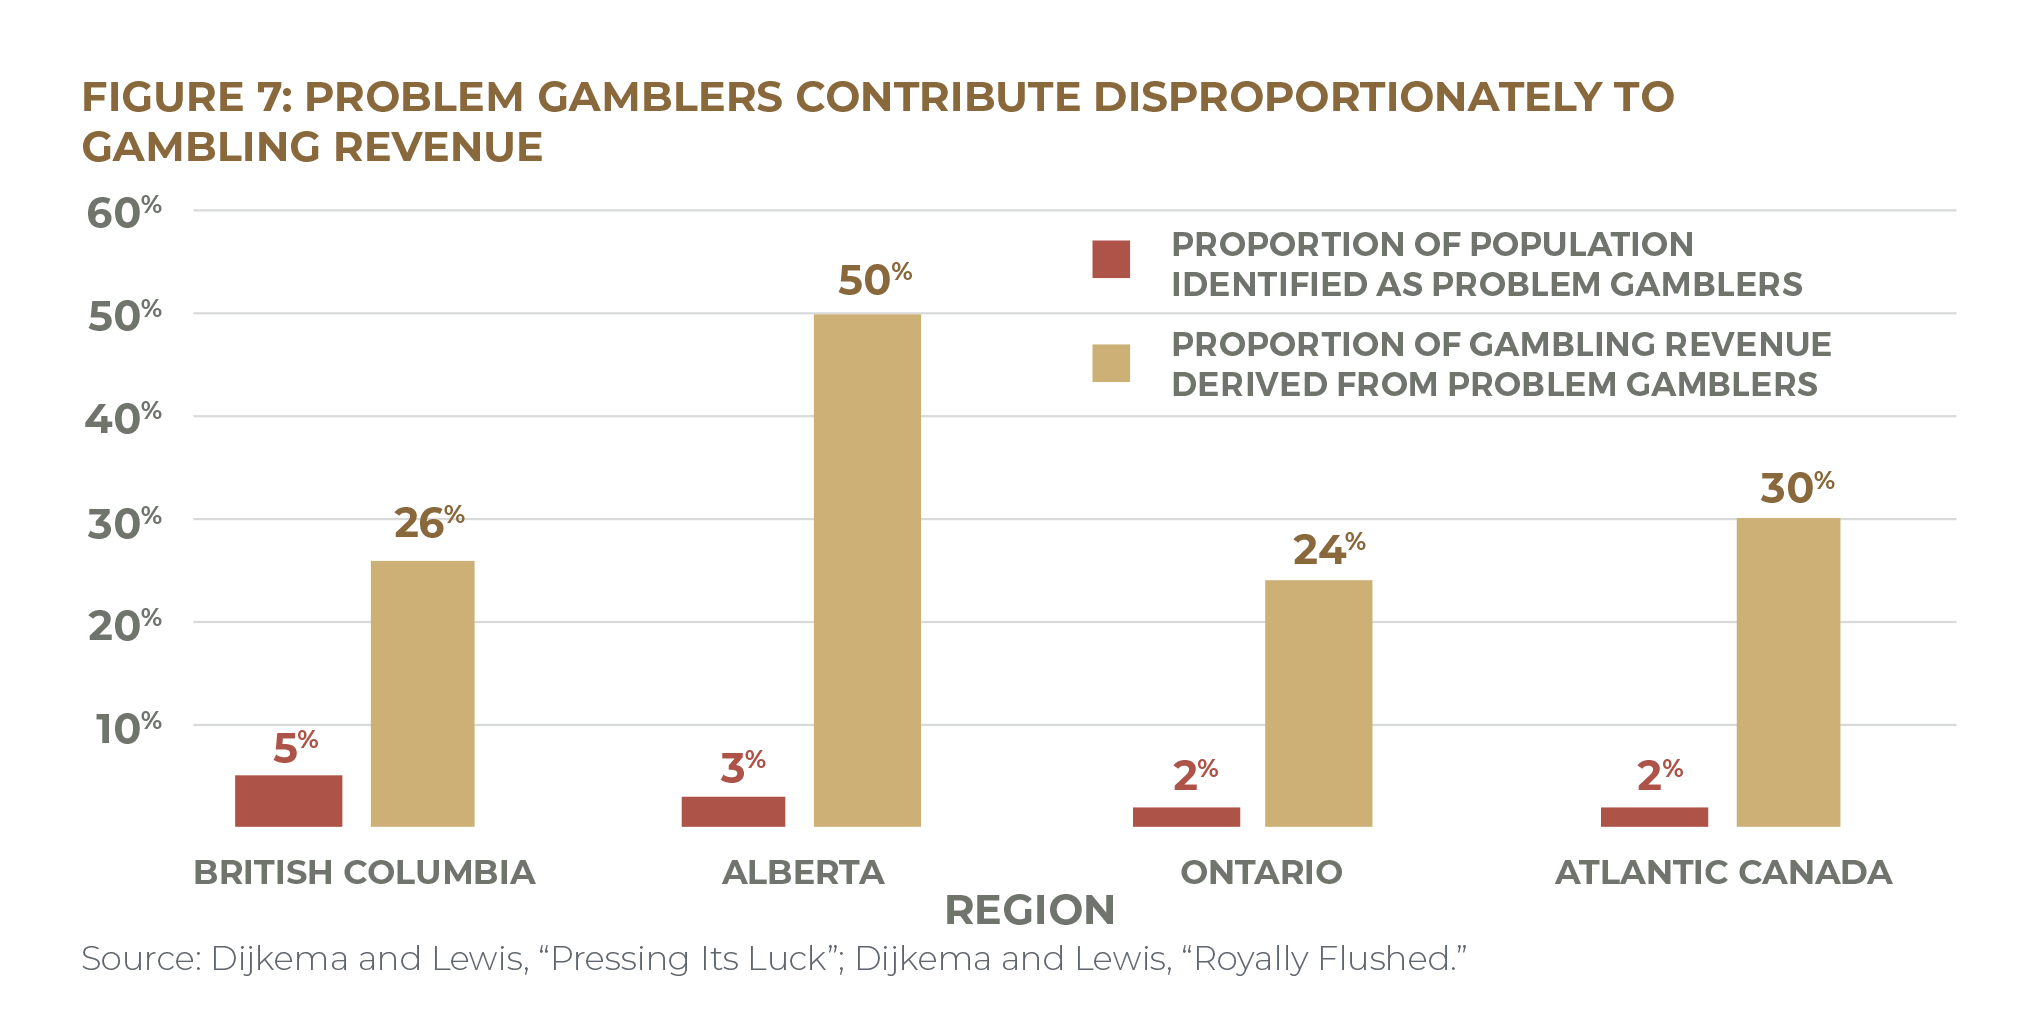 Figure 7: Problem Gamblers Contribute Disproportionately to Gambling Revenue